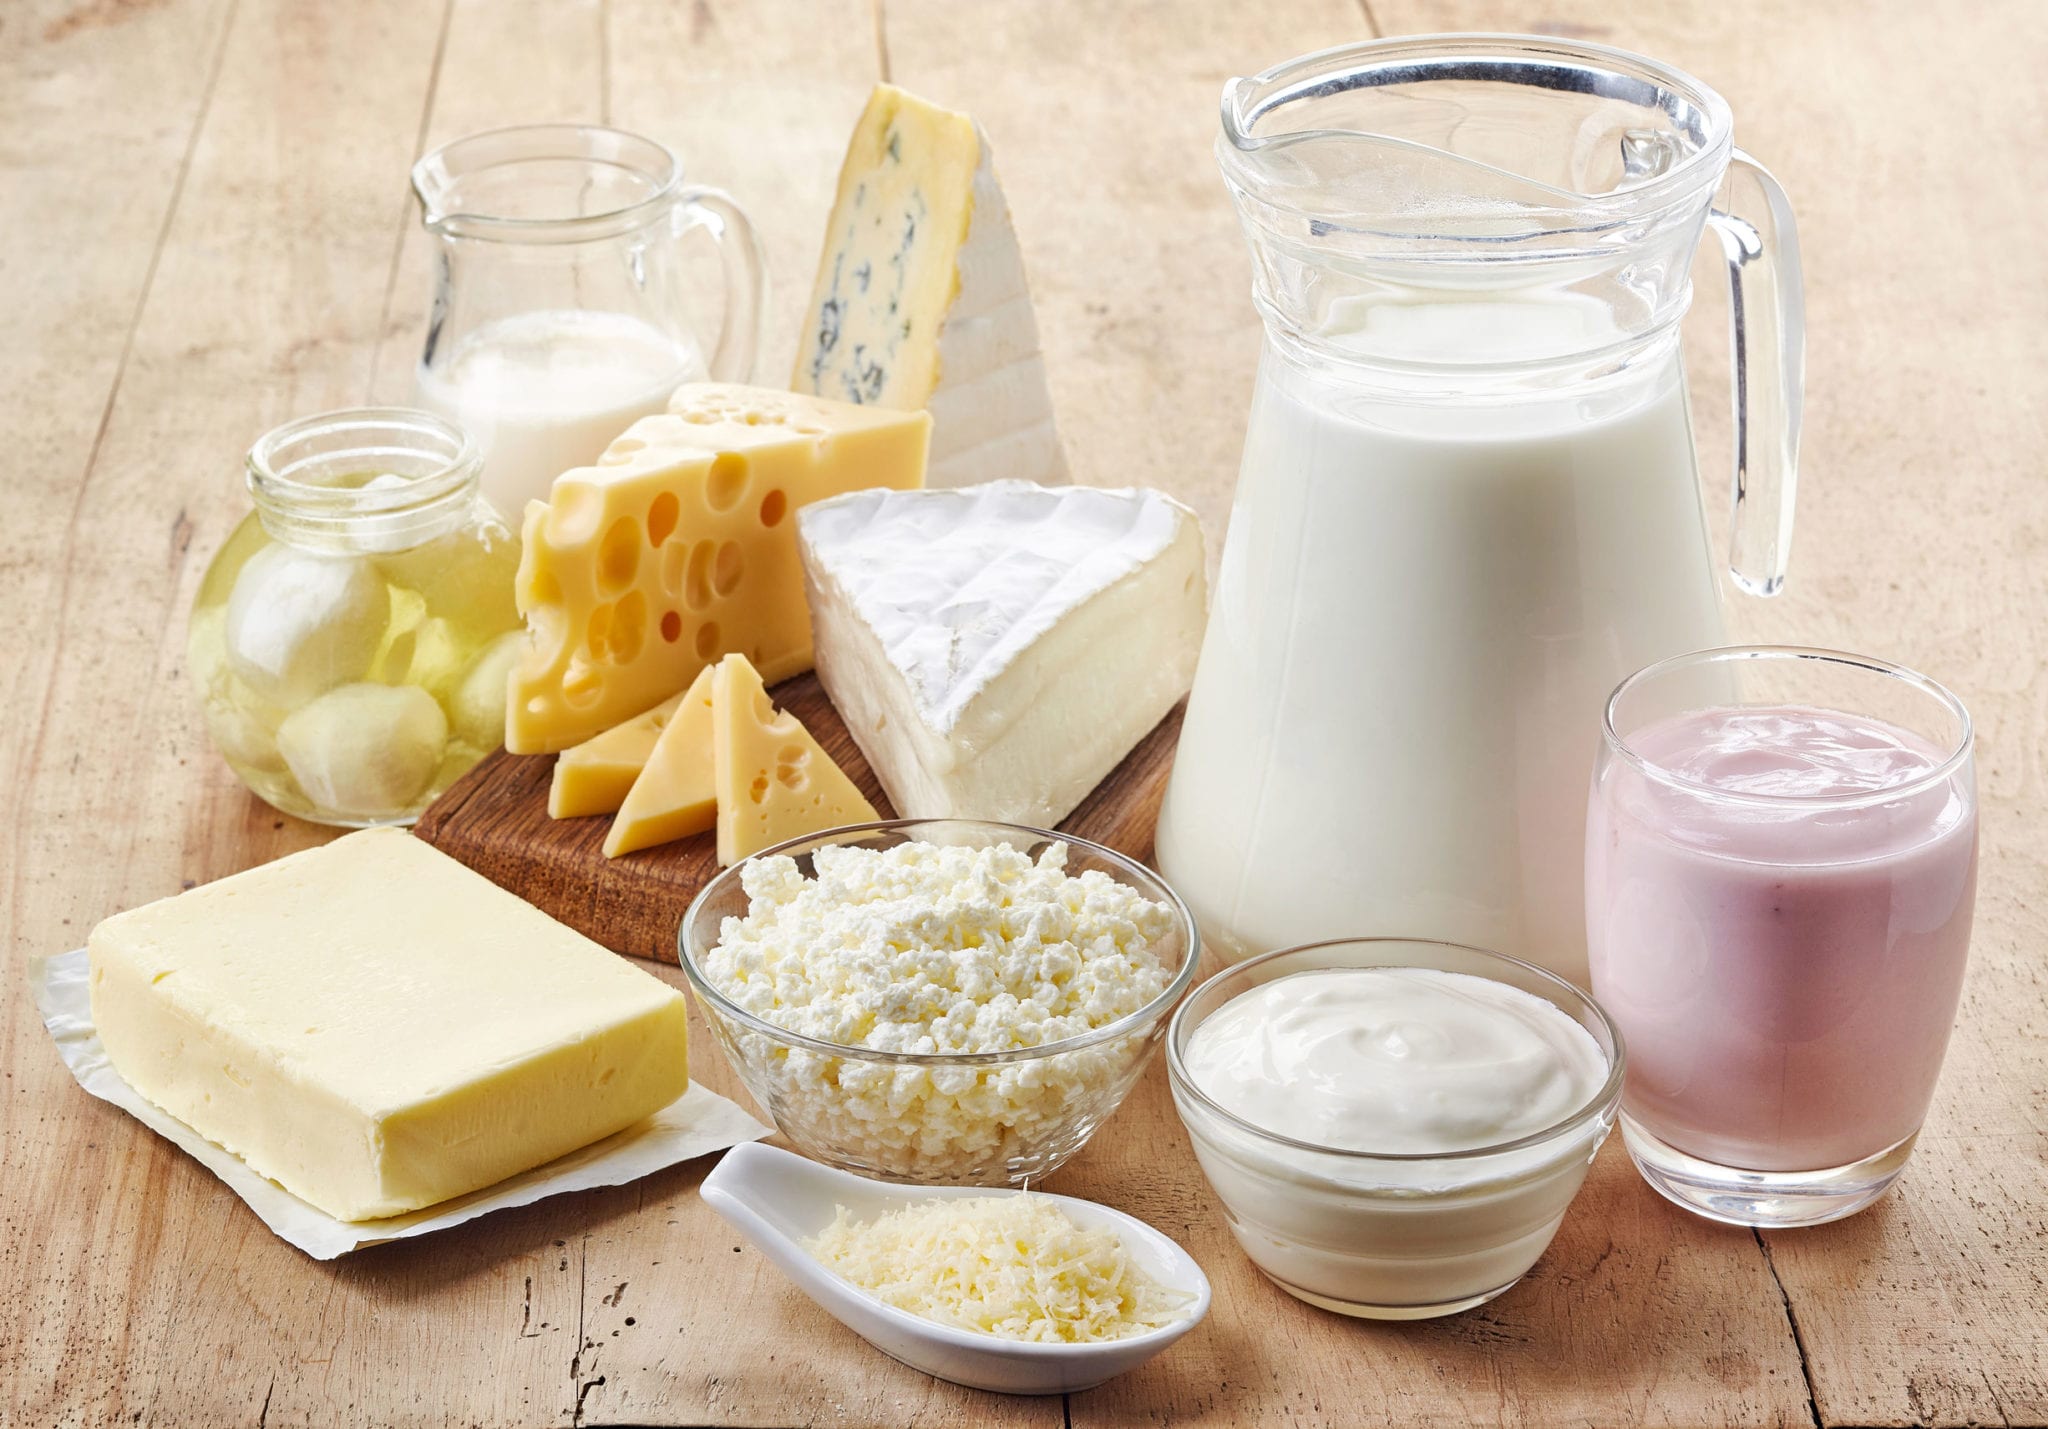 The Relationship between Dental Health and Dairy Products